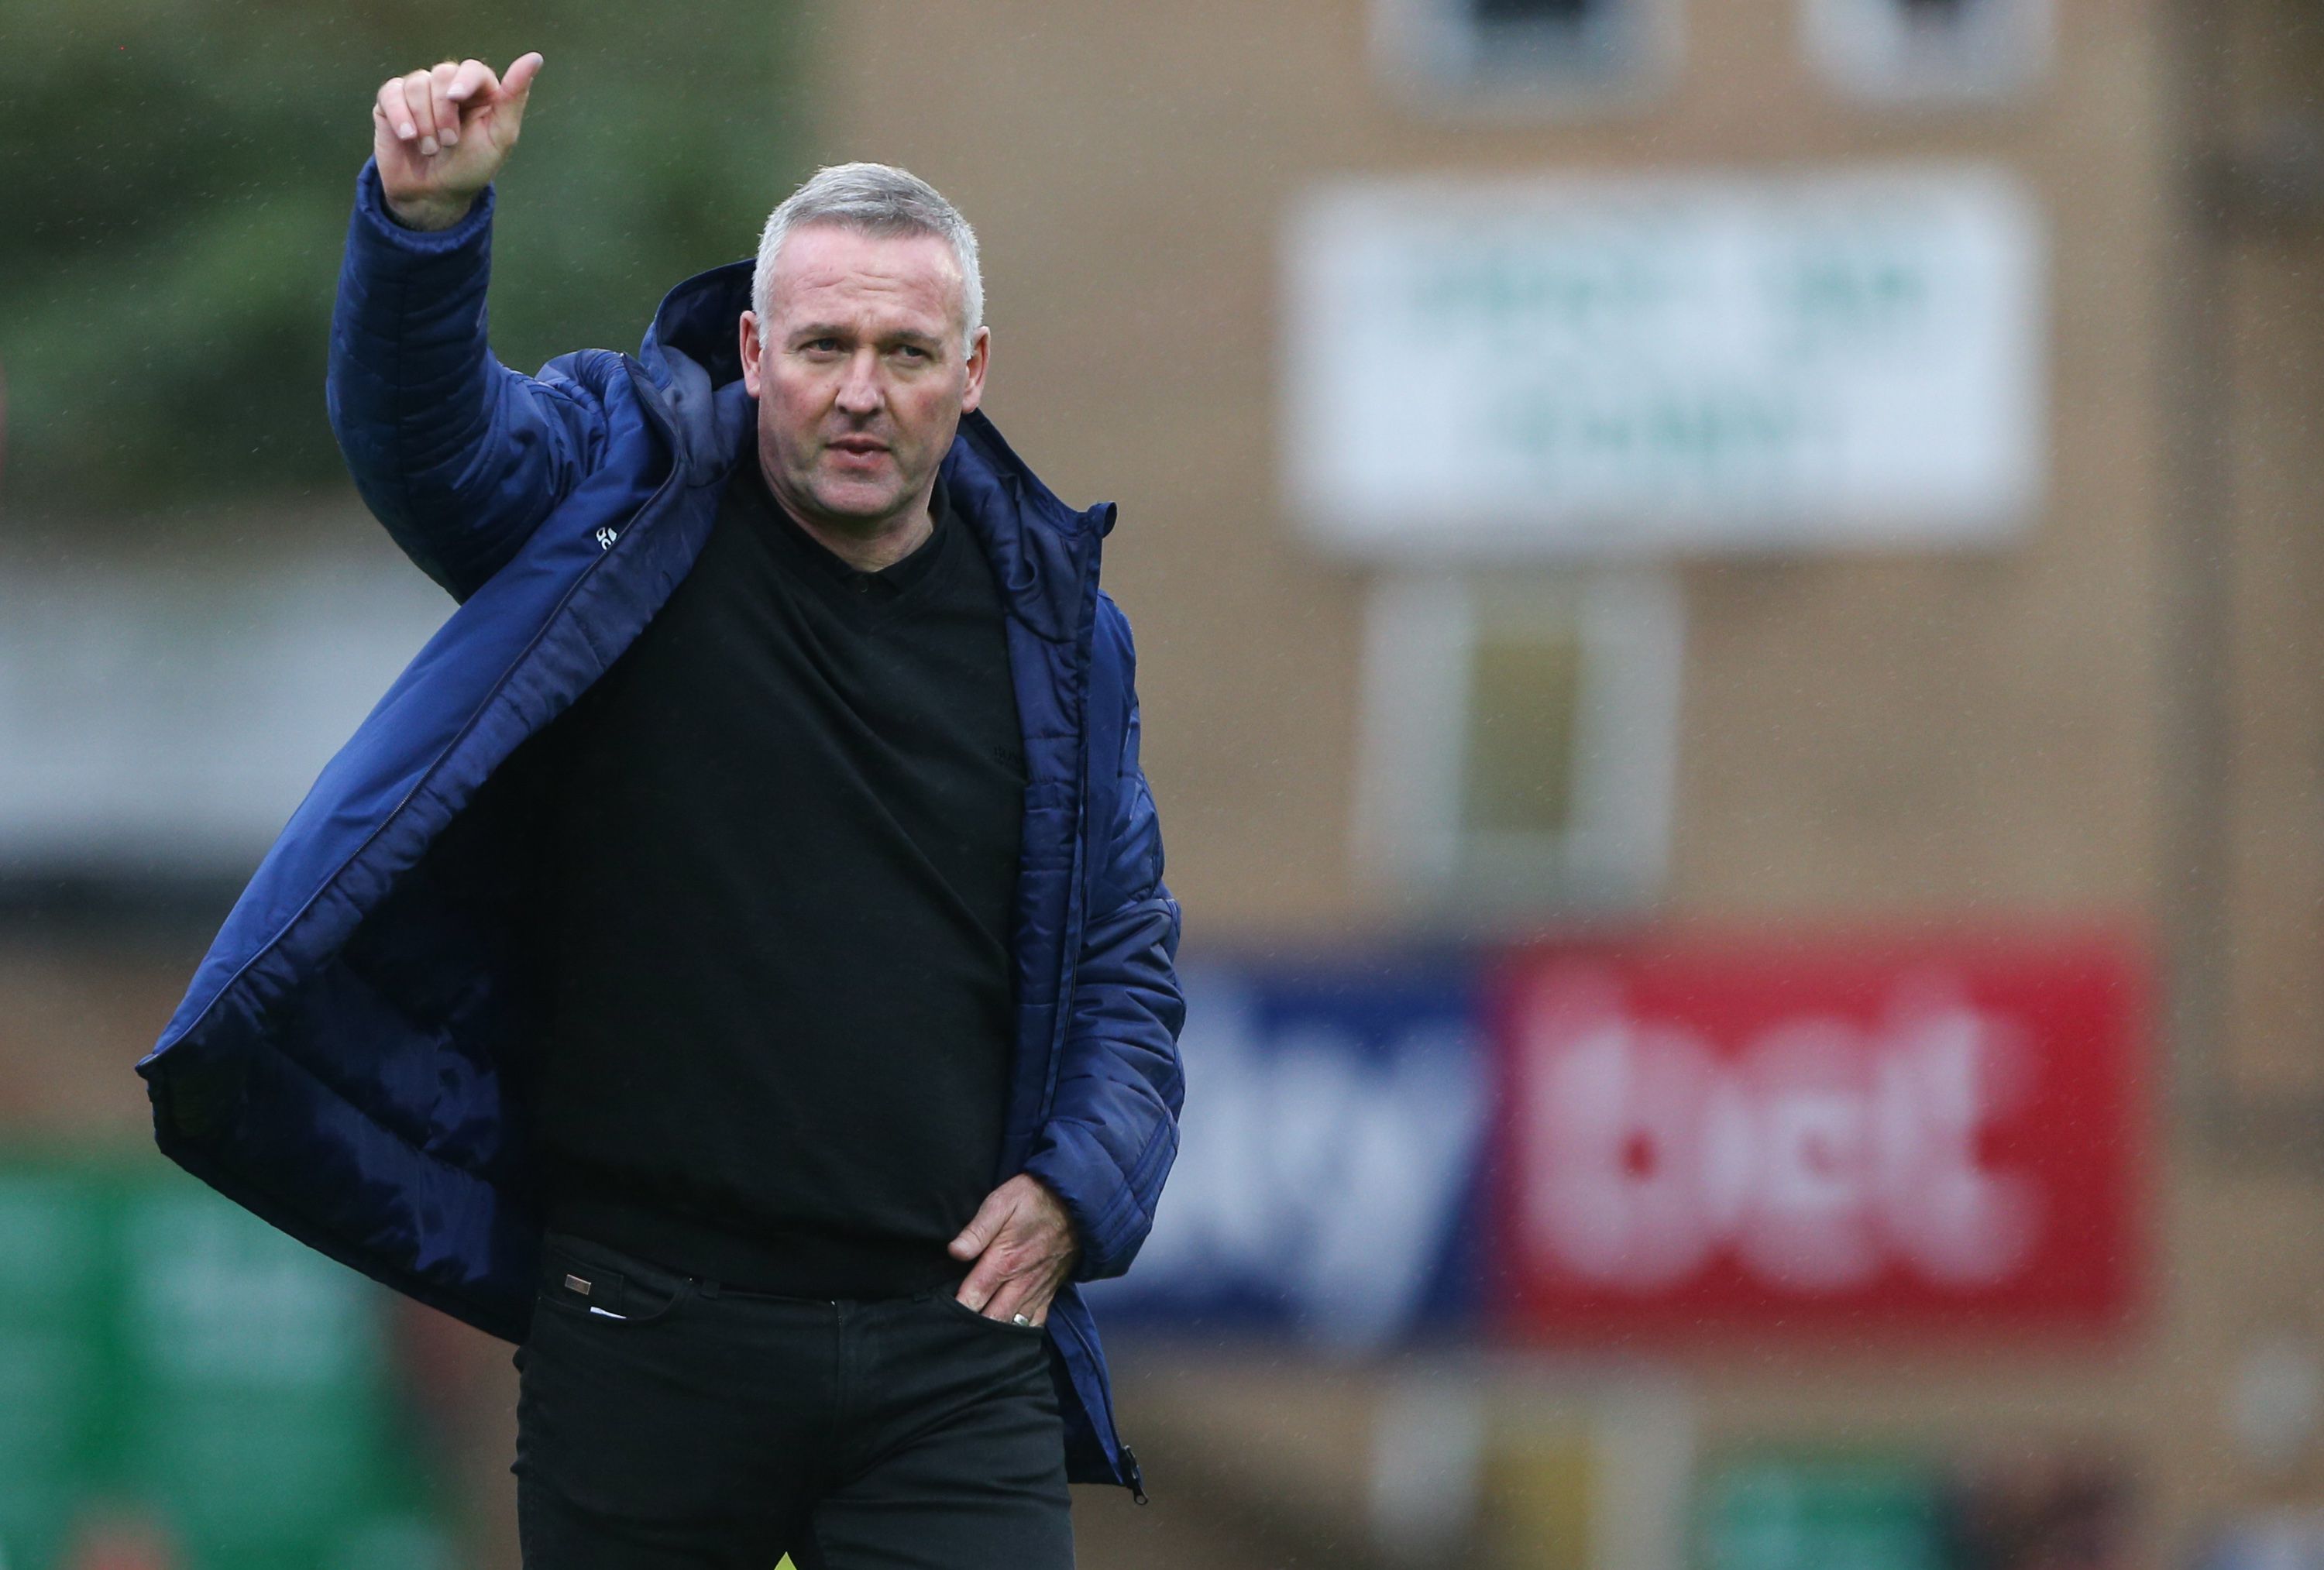 Paul Lambert is focused on promotion for his Ipswich Town side